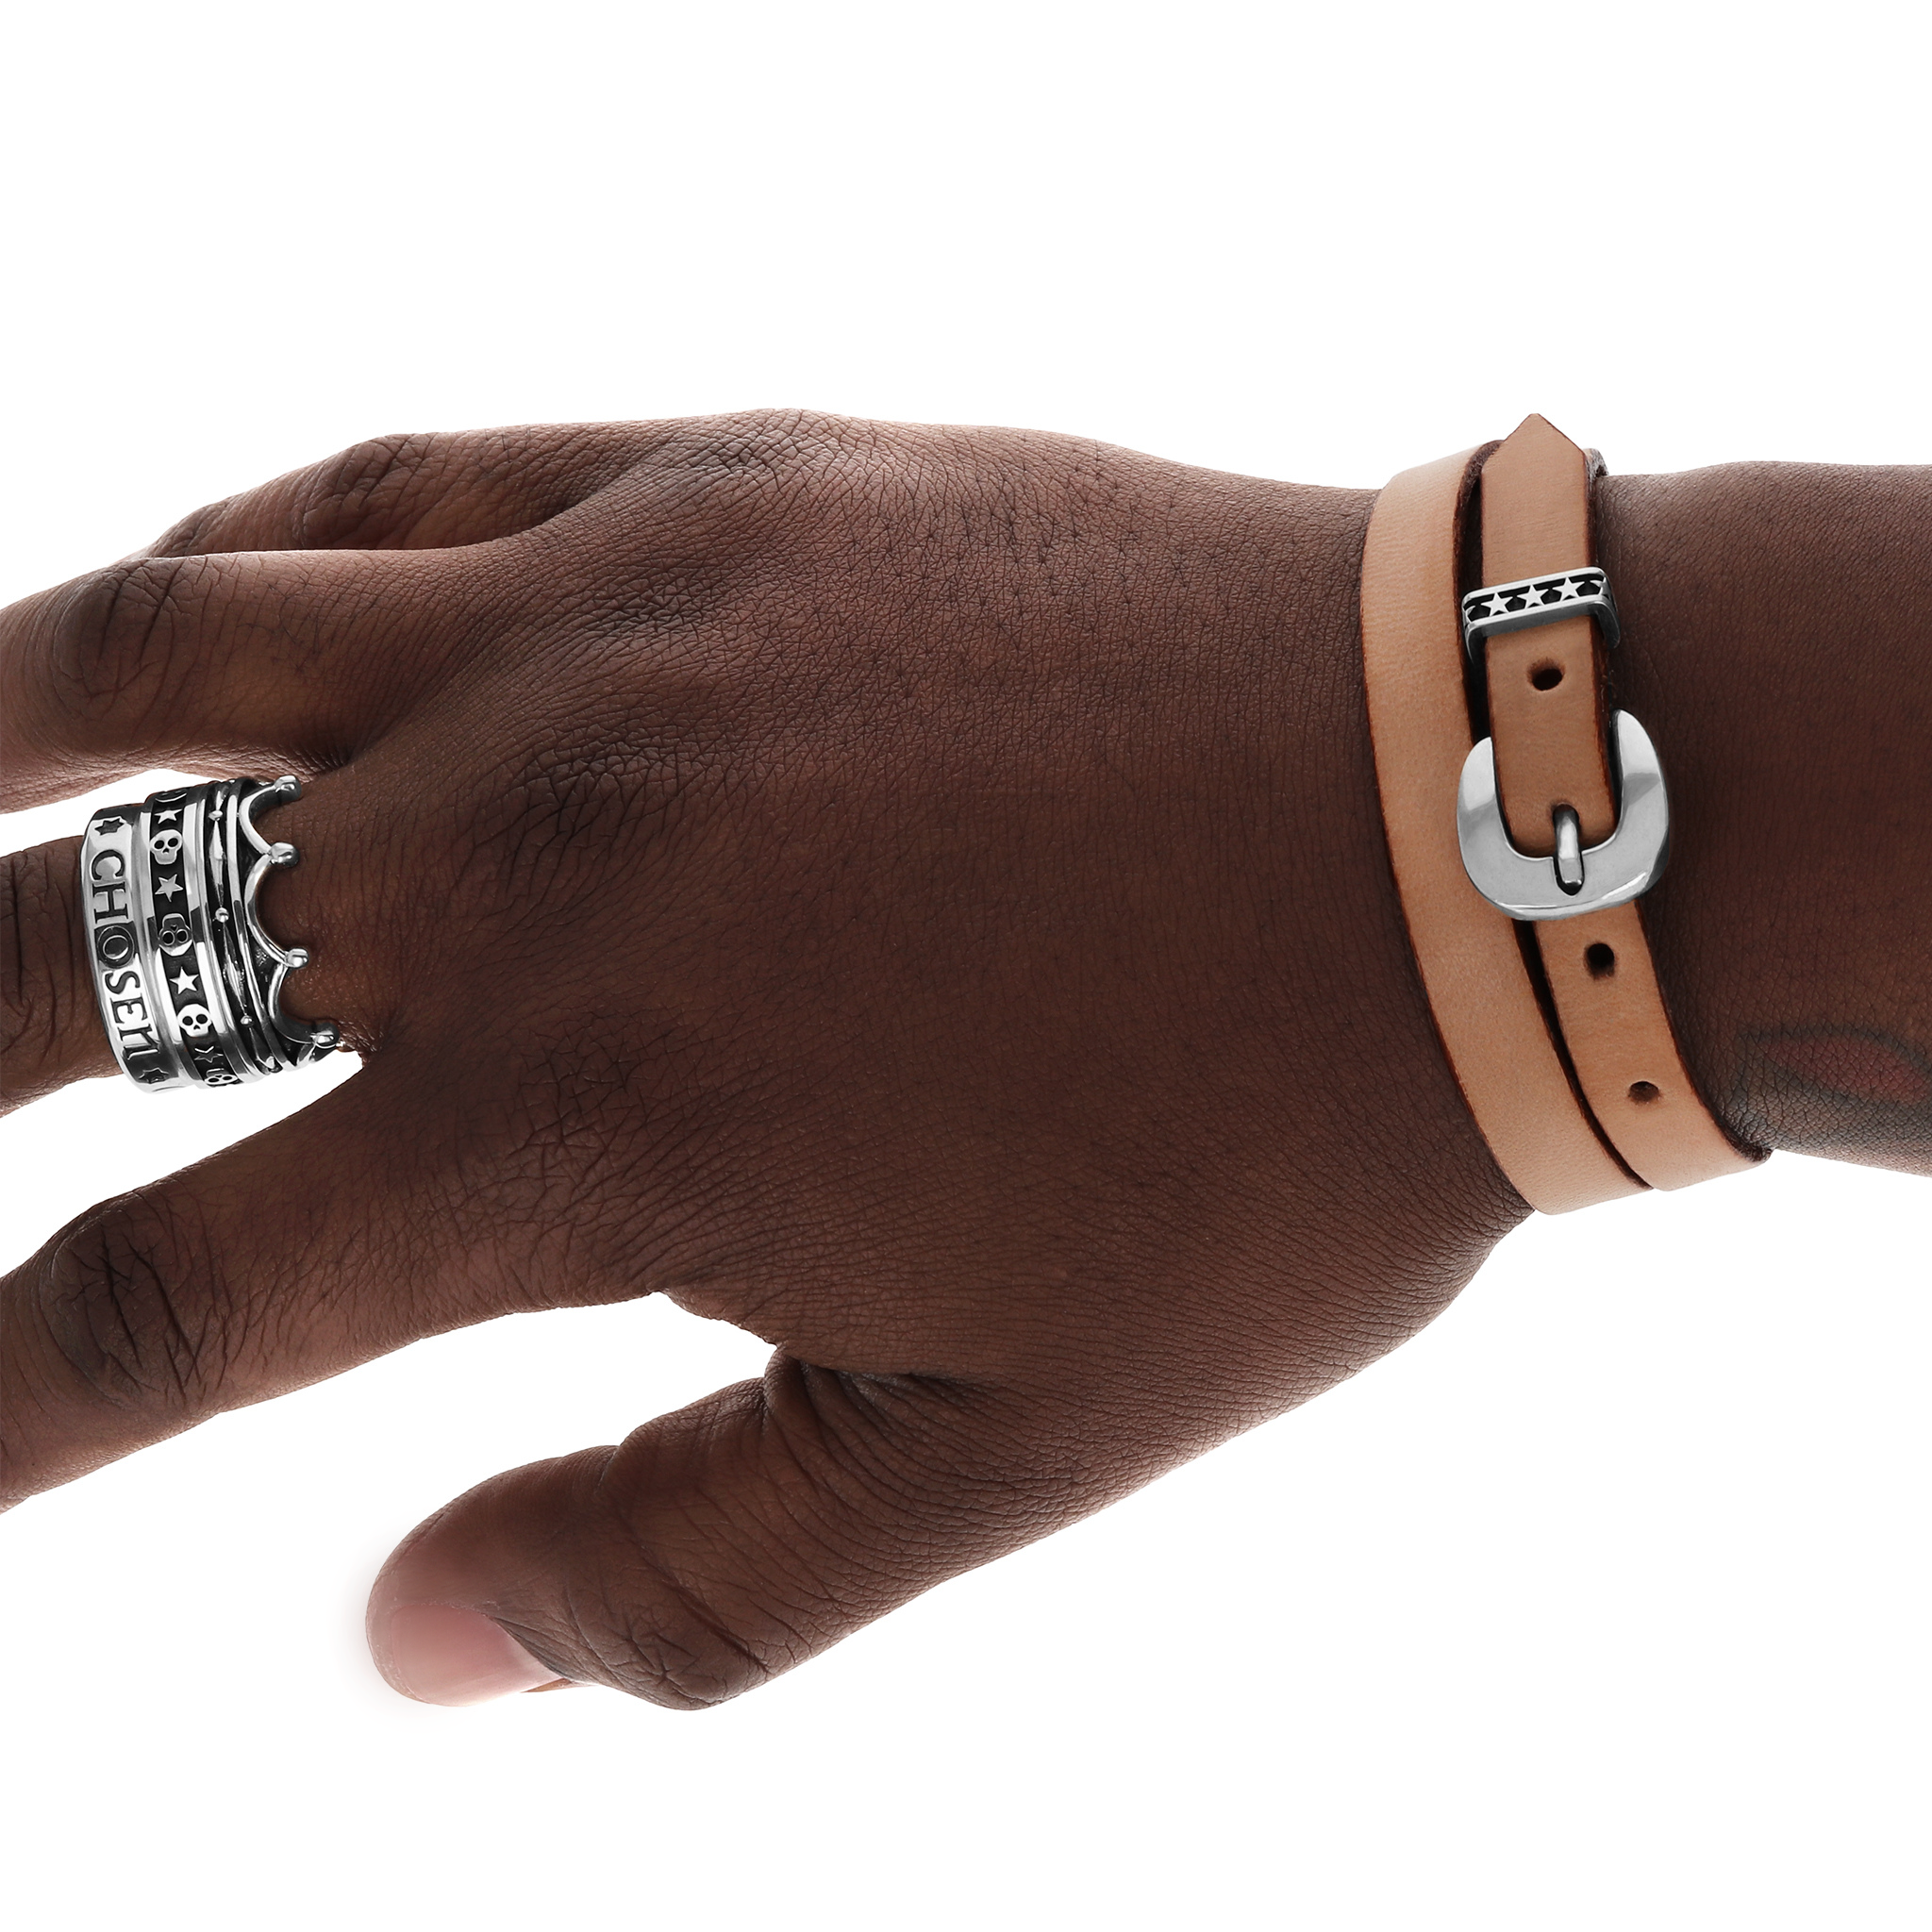 Brown Double Wrap Leather Bracelet with Buckle and Stars on model's wrist